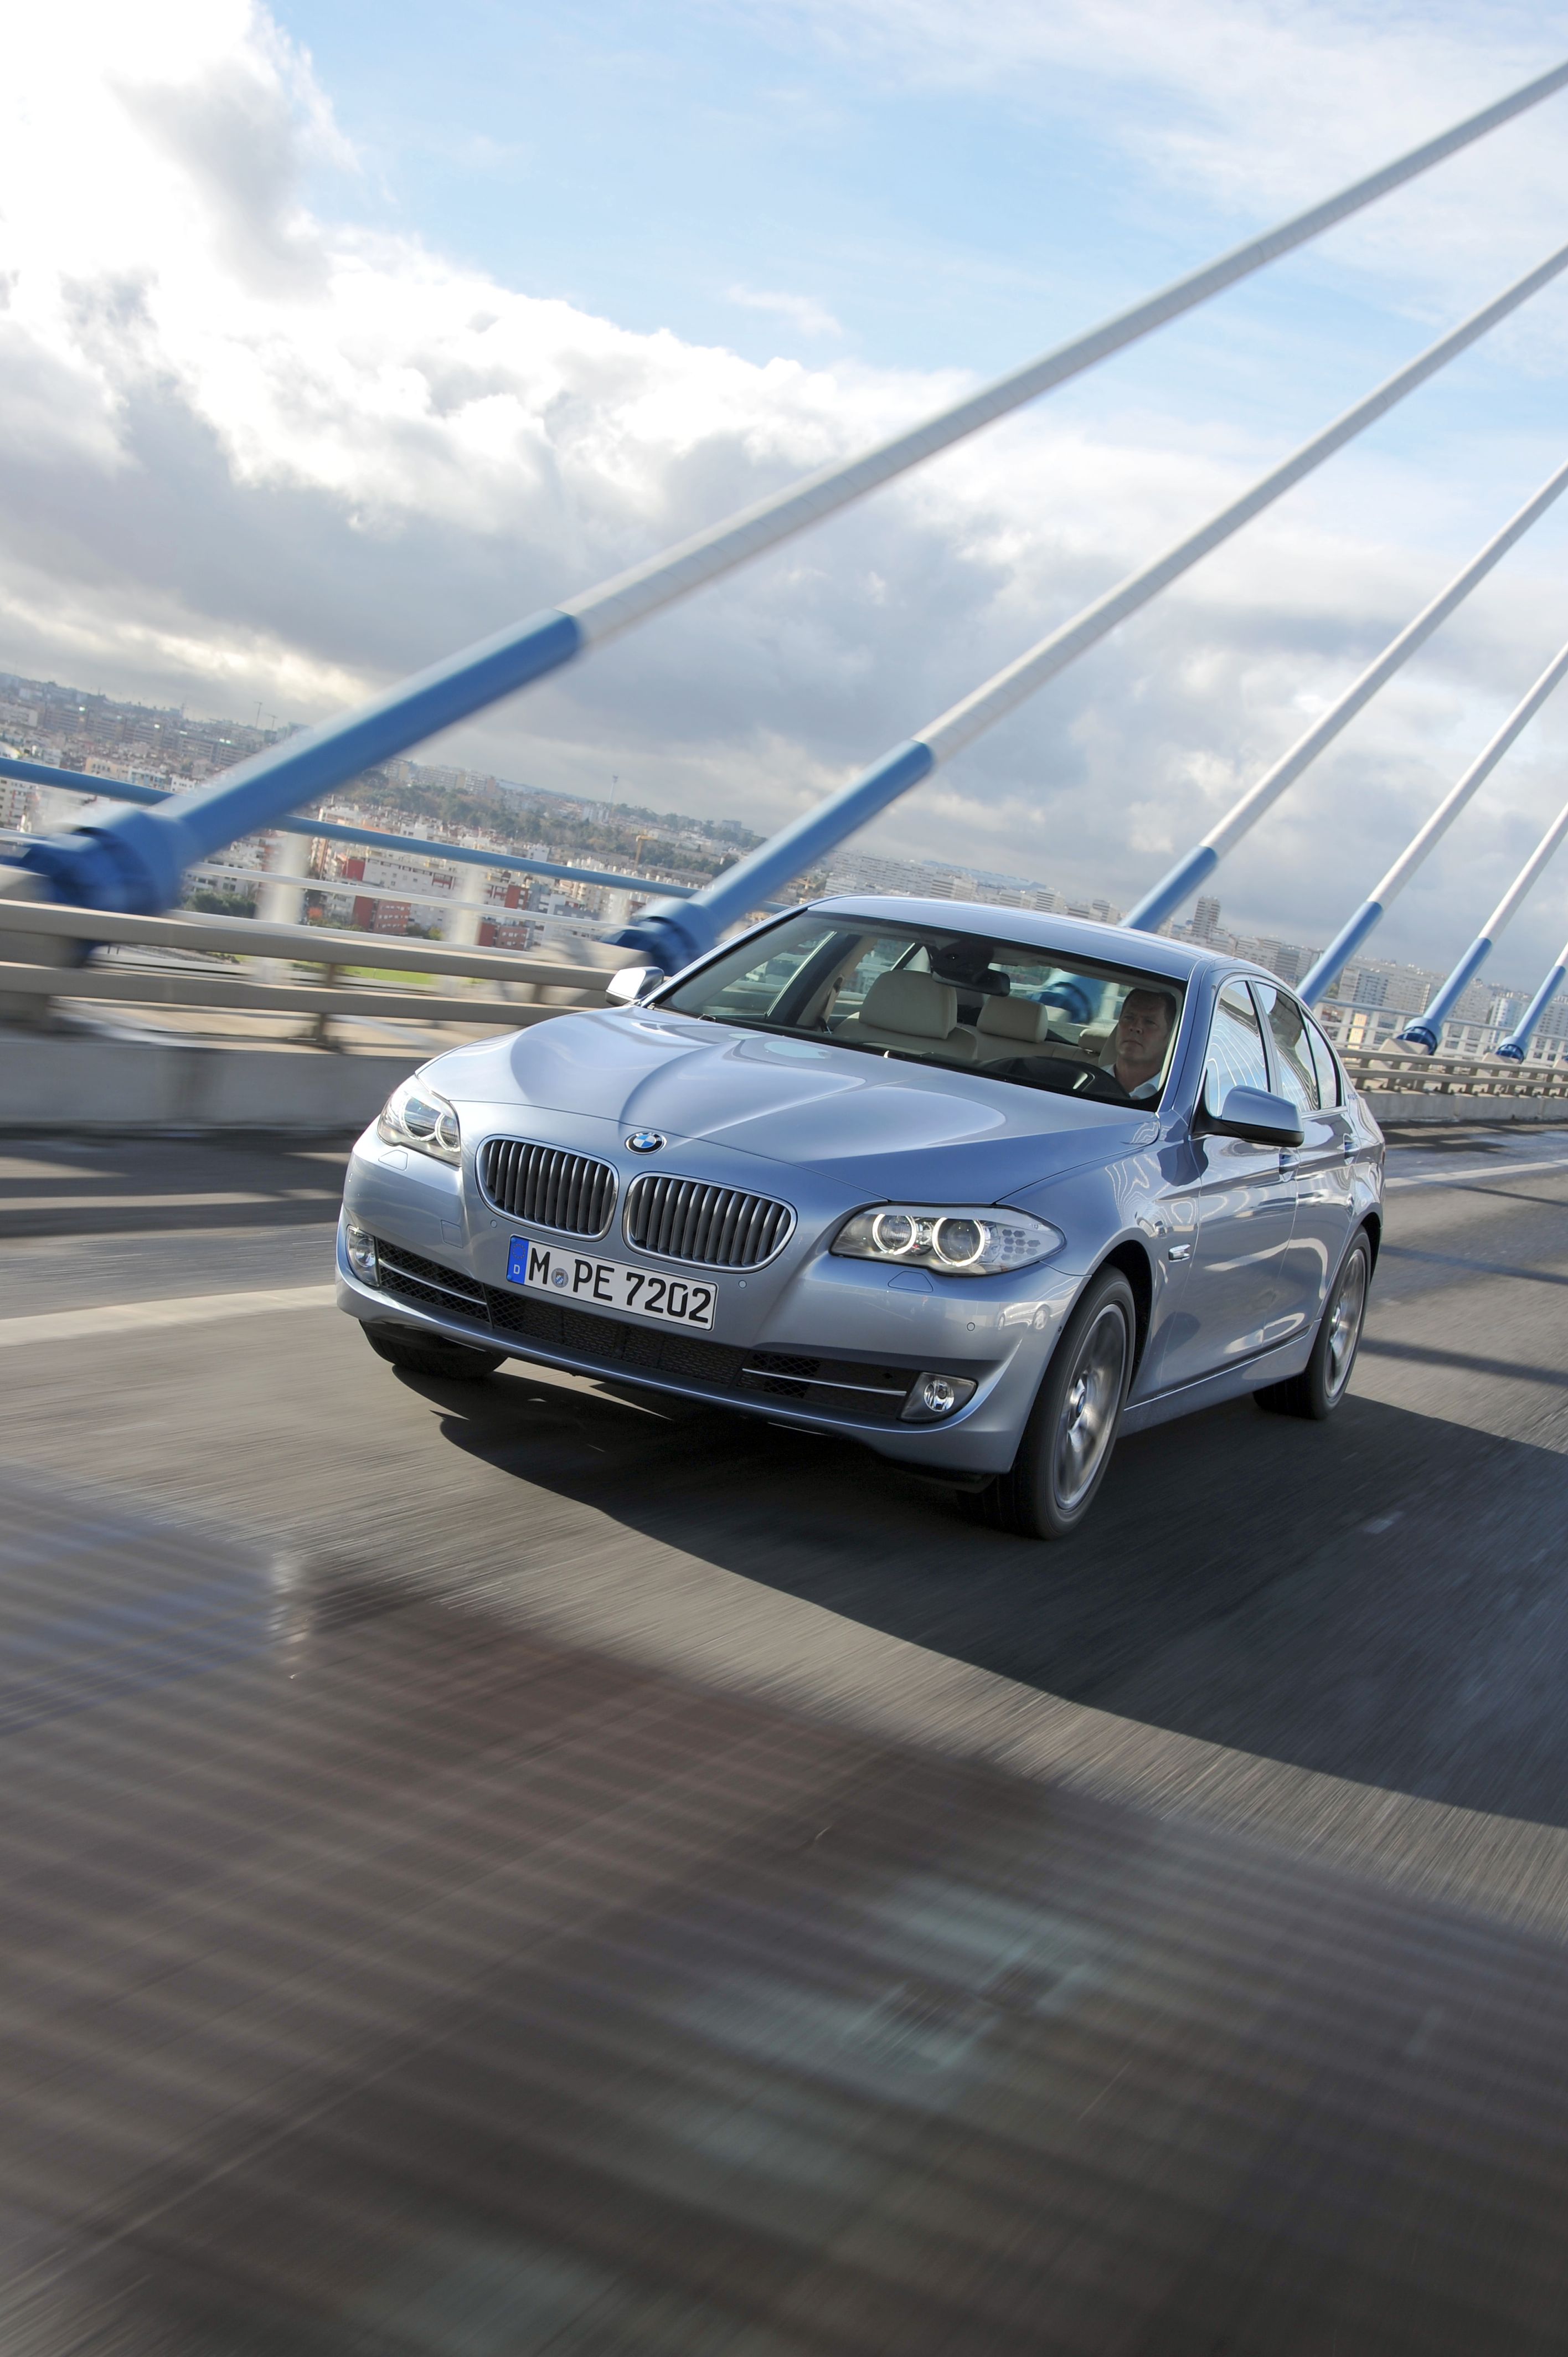 The BMW 535 active hybrid was on the list